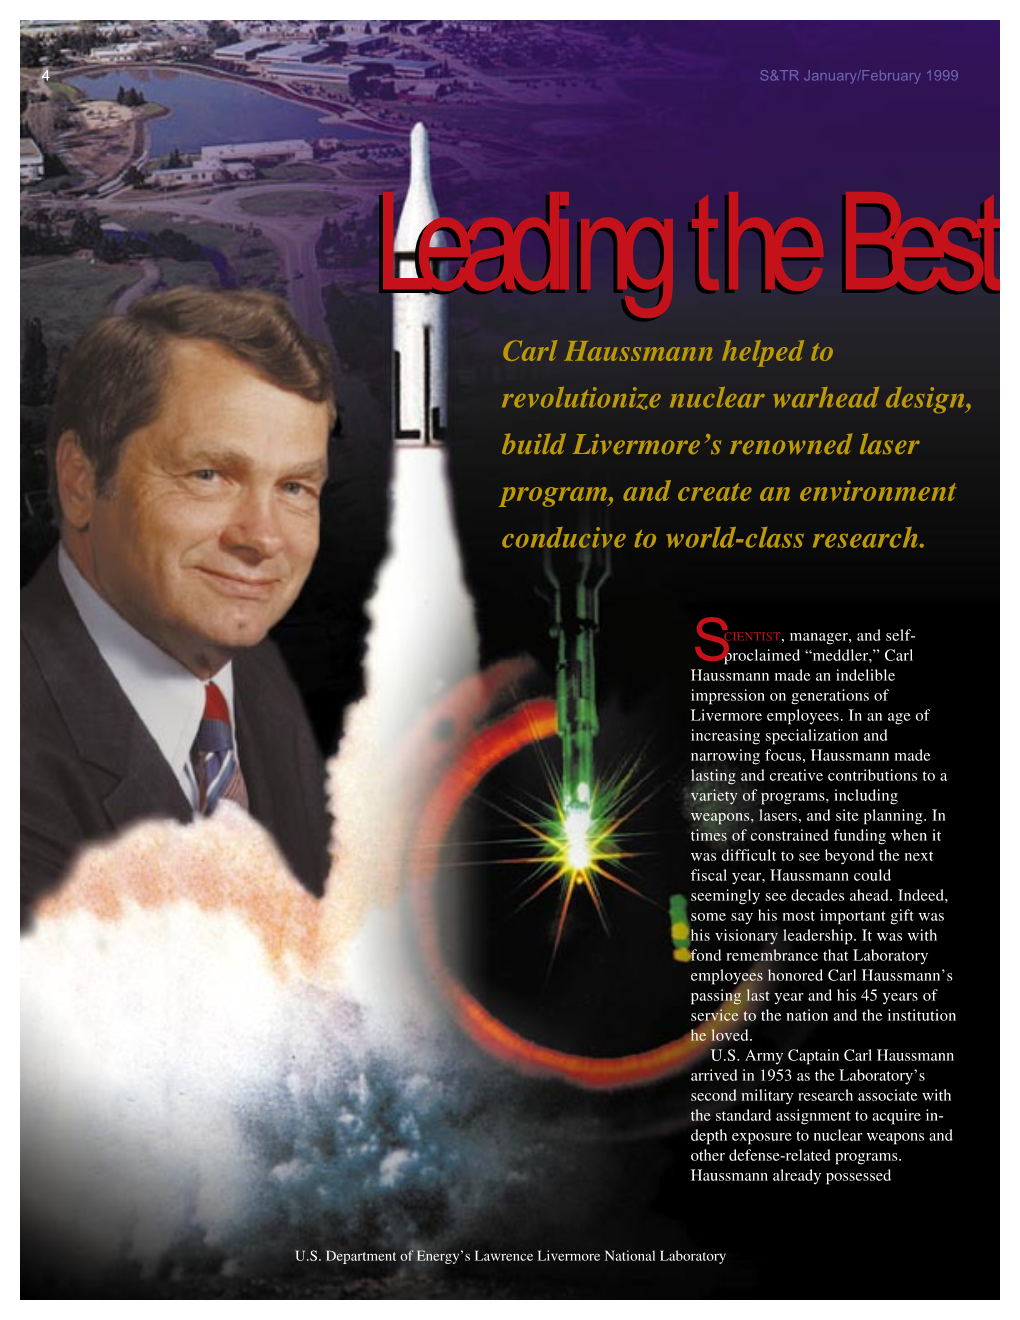 Carl Haussmann Helped to Revolutionize Nuclear Warhead Design, Build Livermore’S Renowned Laser Program, and Create an Environment Conducive to World-Class Research